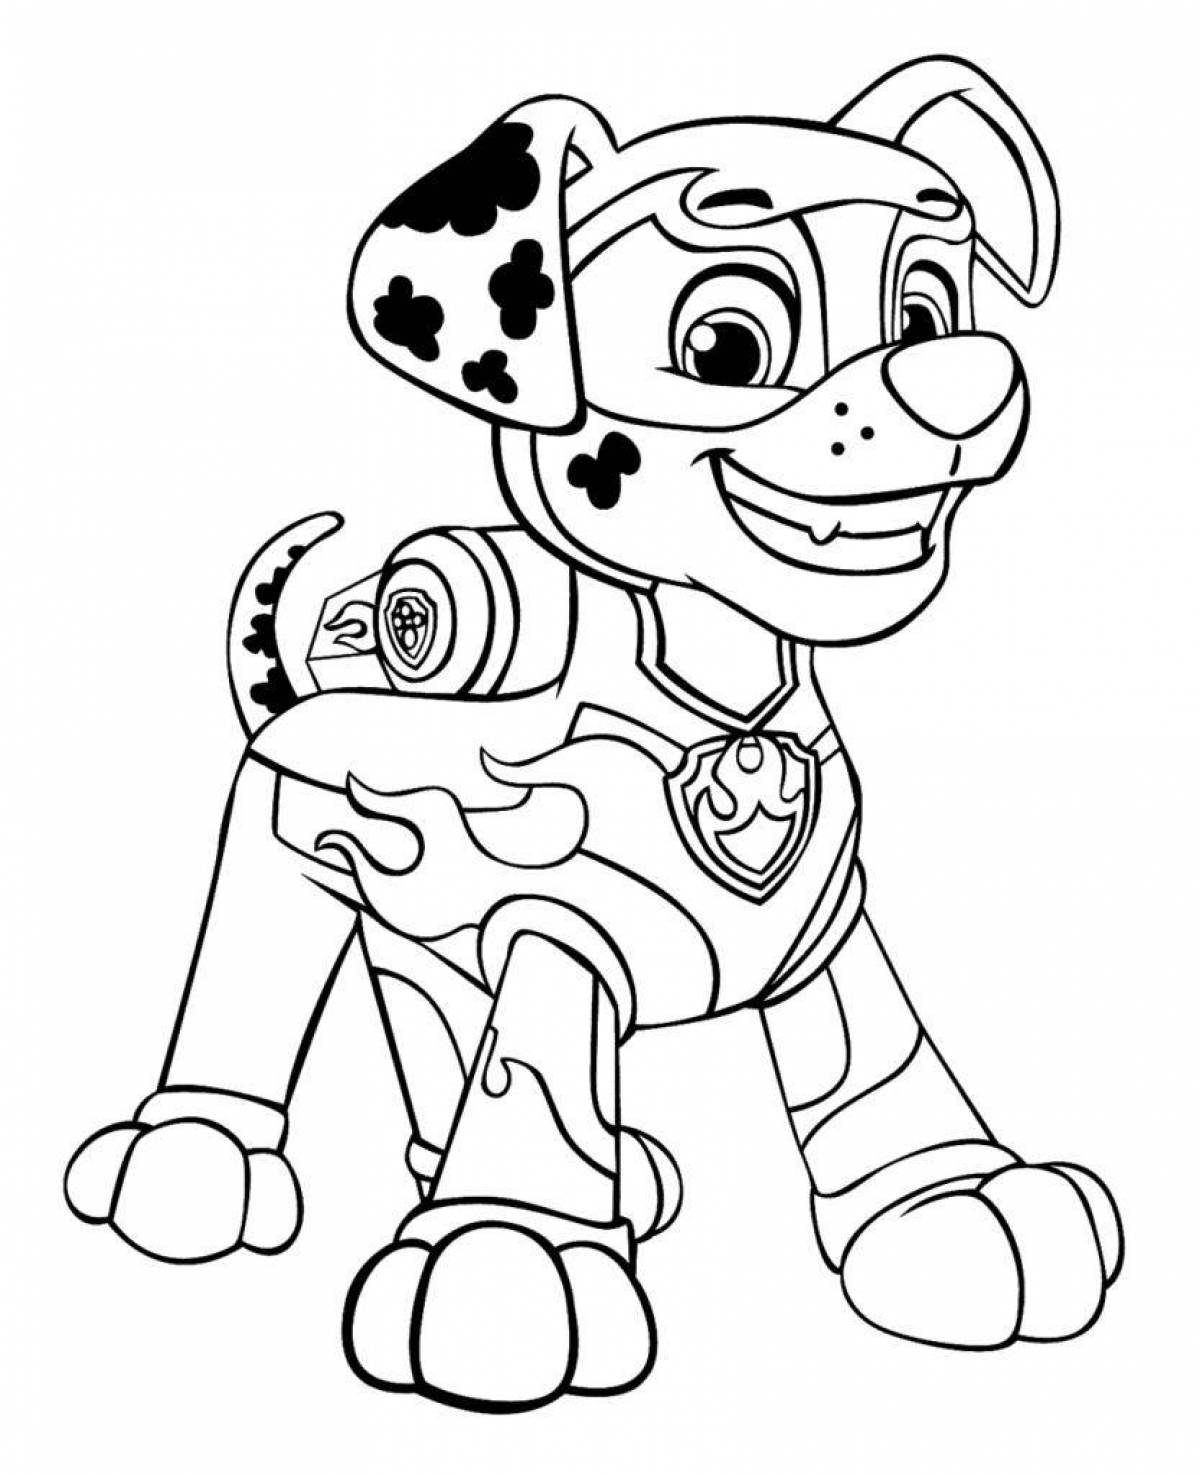 Exciting coloring wild cat paw patrol